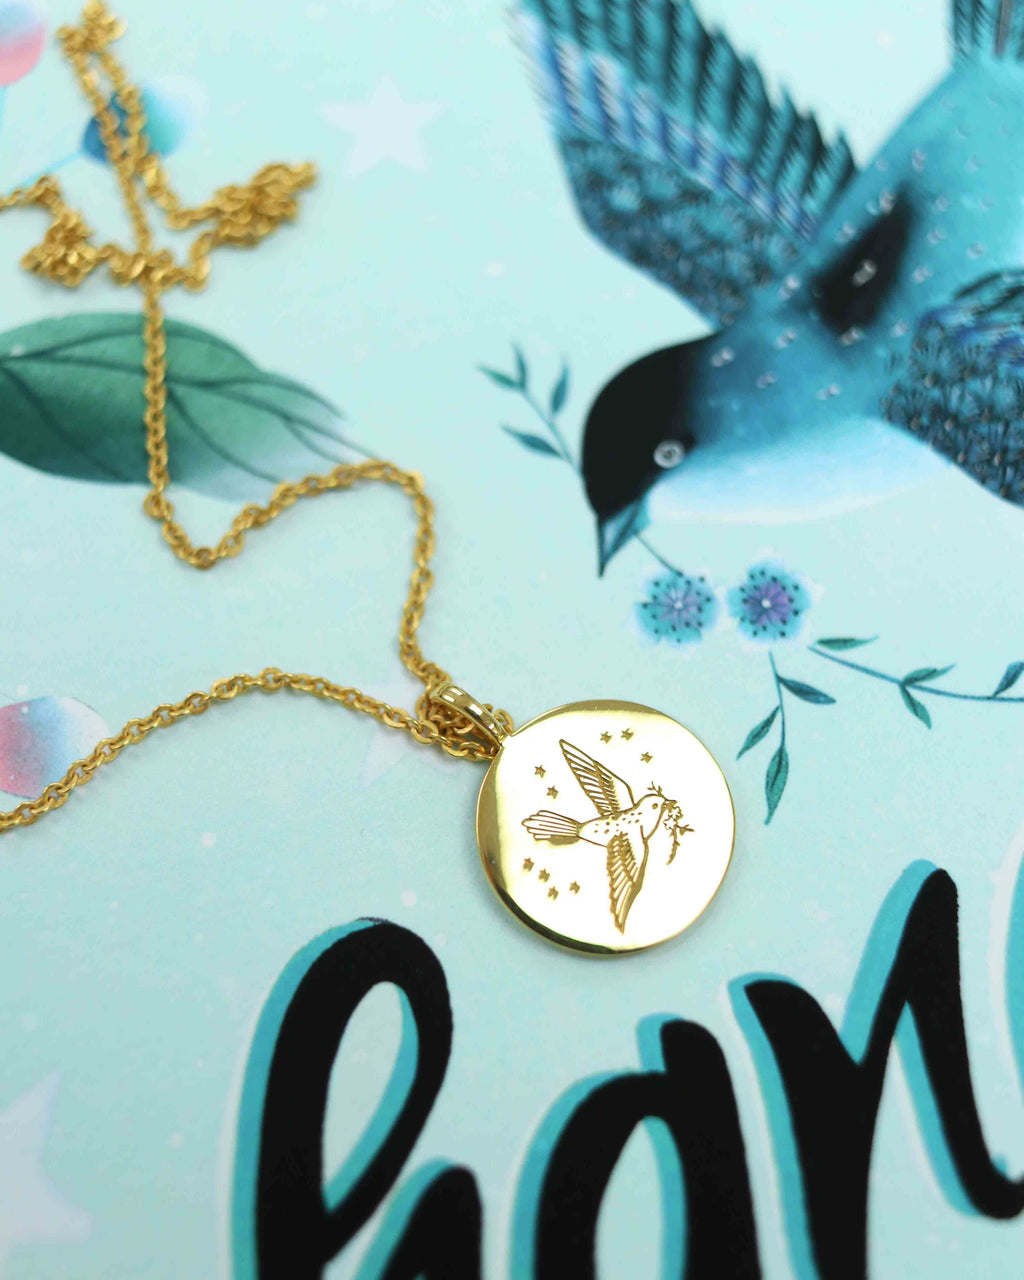 The gold coin necklace featuring an engraved bird sits upon Diane Hill's A change is gonna come artwork.